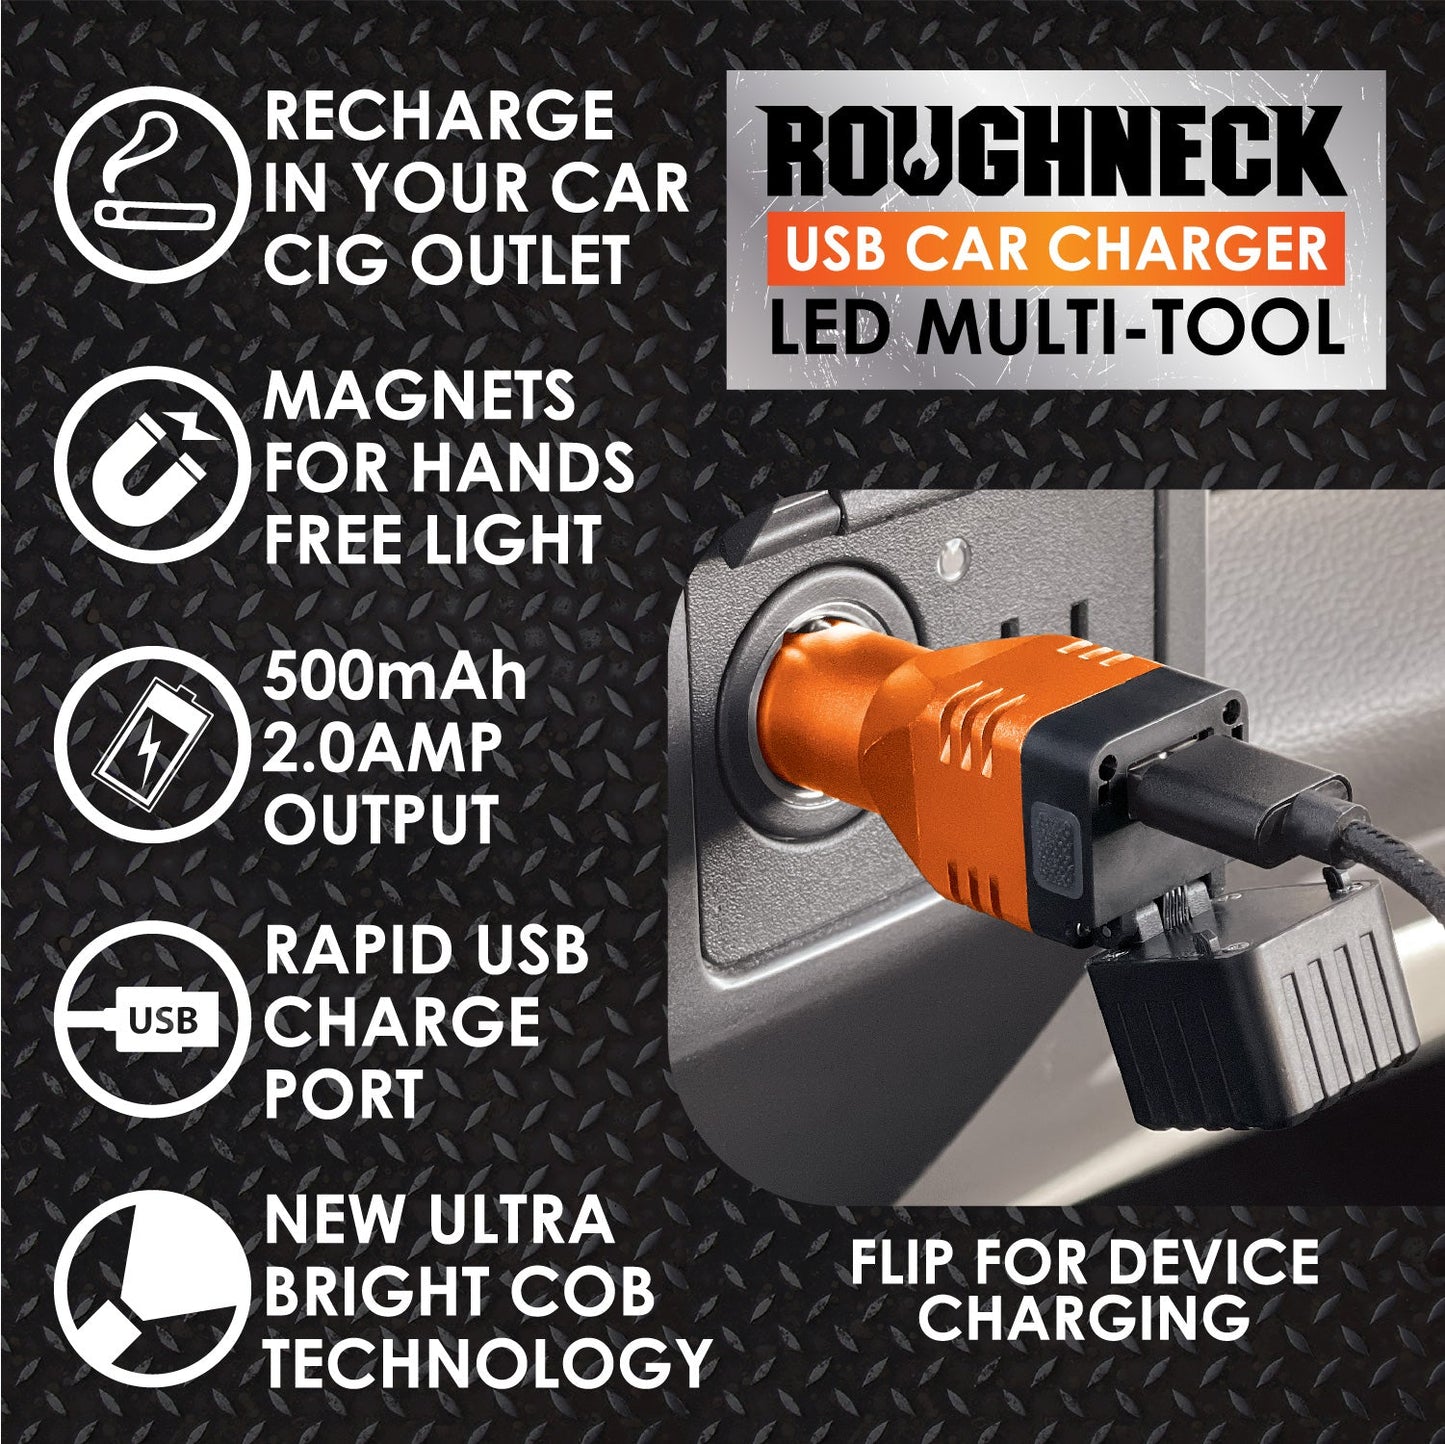 ITEM NUMBER 023693 USB CHARGER LIGHT ROUGHNECK 6 PIECES PER DISPLAY